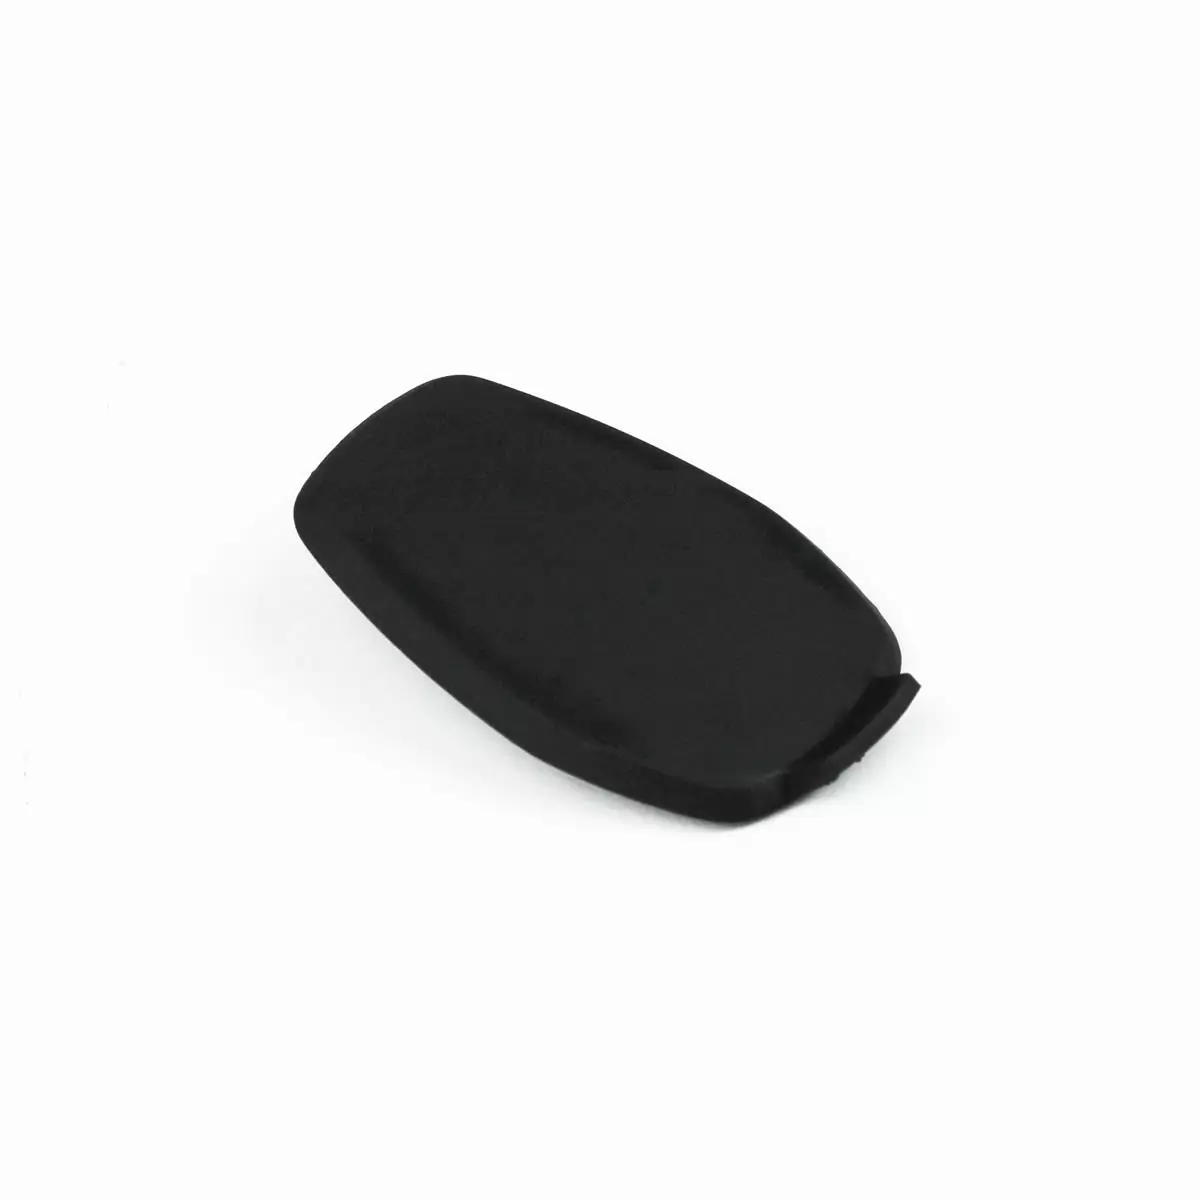 Rubber cover for charging port for Jarifa2 and Aventura2 with Bosch drive unit - image